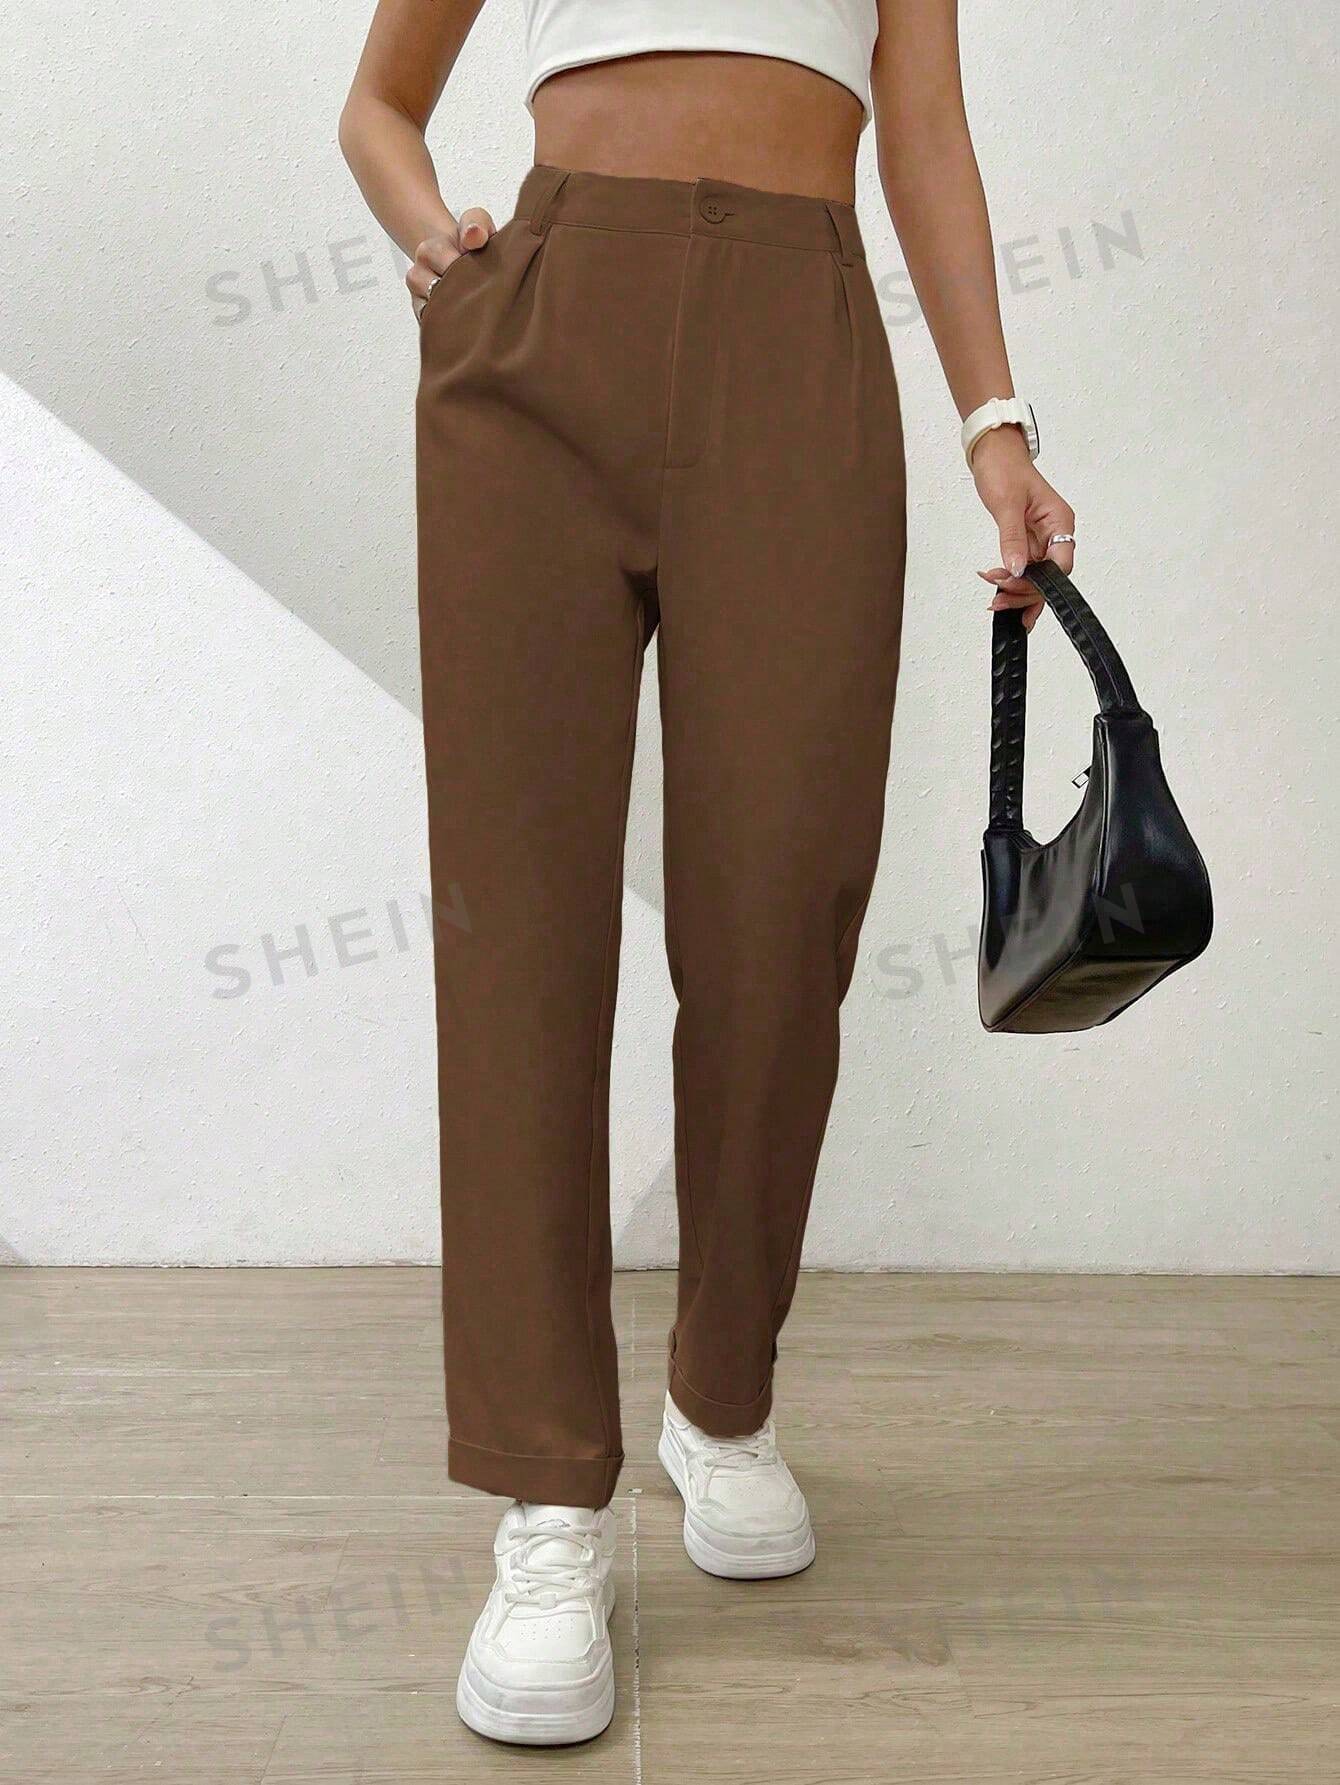 spring and summer new style pants solid color loose casual pants pocket drawstring leggings women female and lady pants trousers SHEIN Essnce Однотонные широкие брюки со складками и наклонными карманами, коричневый